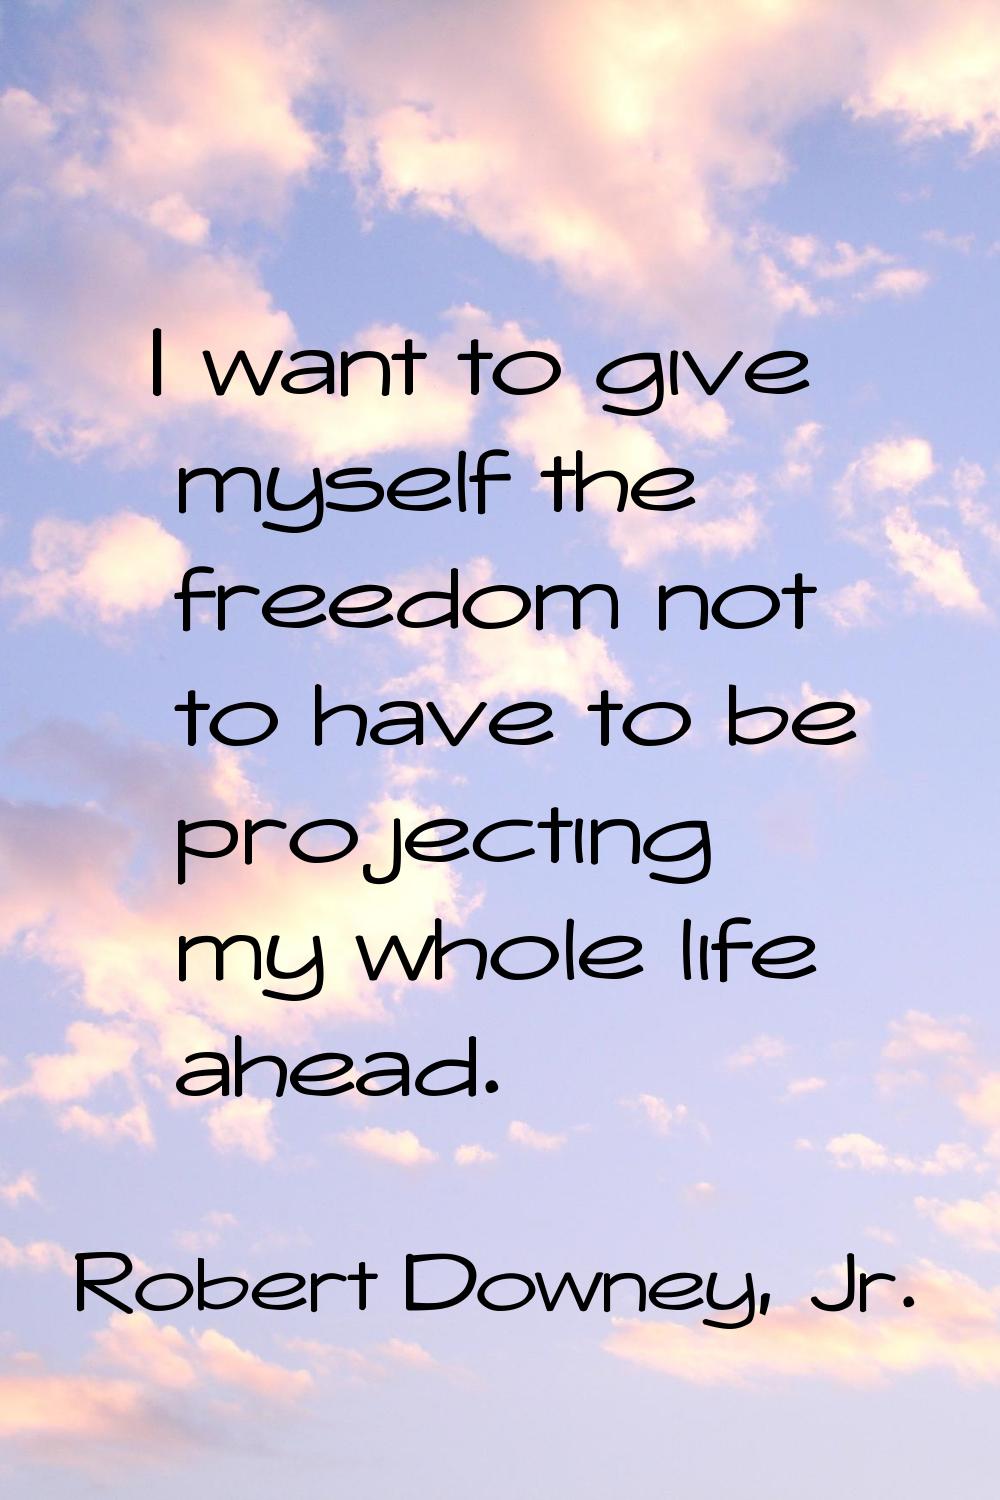 I want to give myself the freedom not to have to be projecting my whole life ahead.